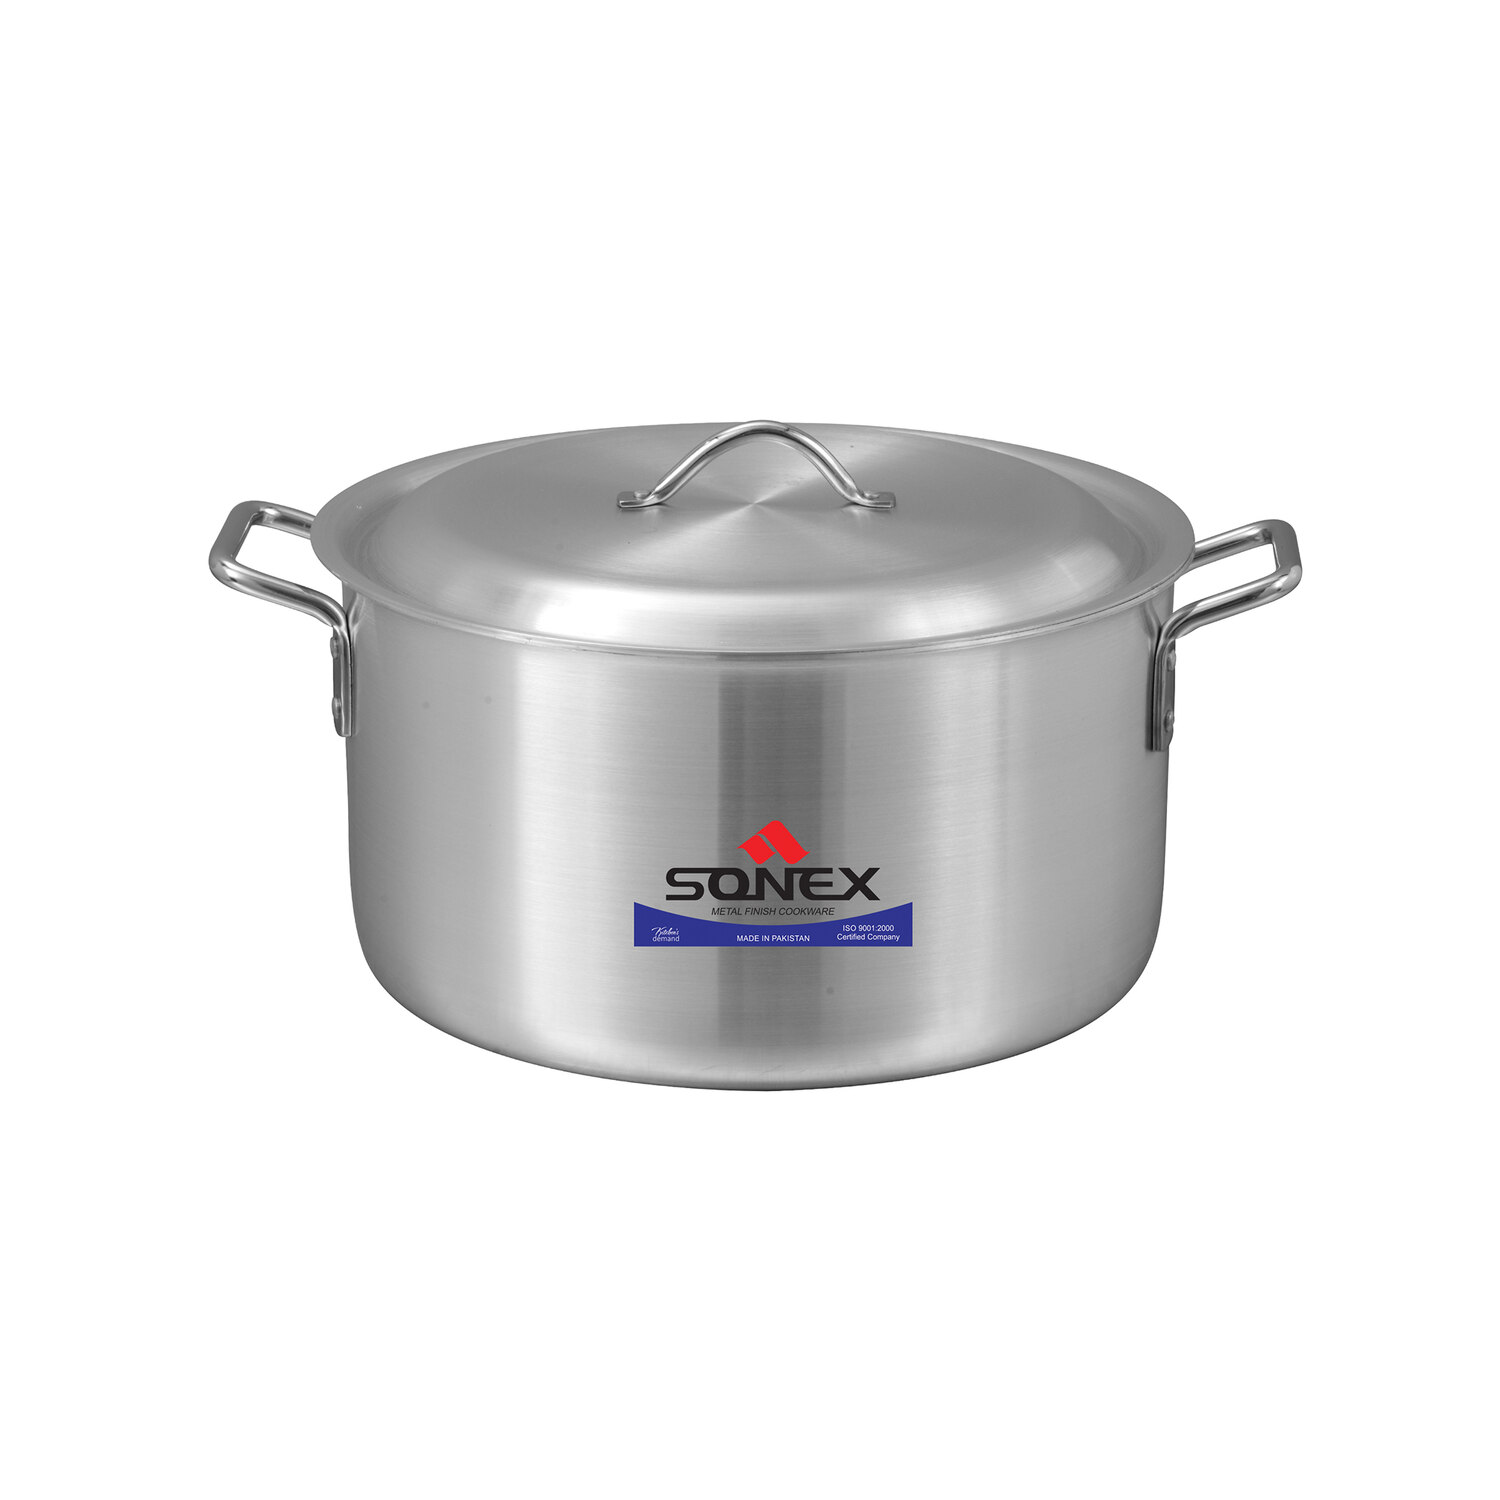 Heavy Metal Finish Easy To Clean Light Weight Sonex Home Kitchen Cooking Pot 3 Pcs Set 8x10 Size 36/38.5/41 Cm Capacity 18/24/29 Liters With Heavy Durable Lid And Handles Original Made In Pakistan